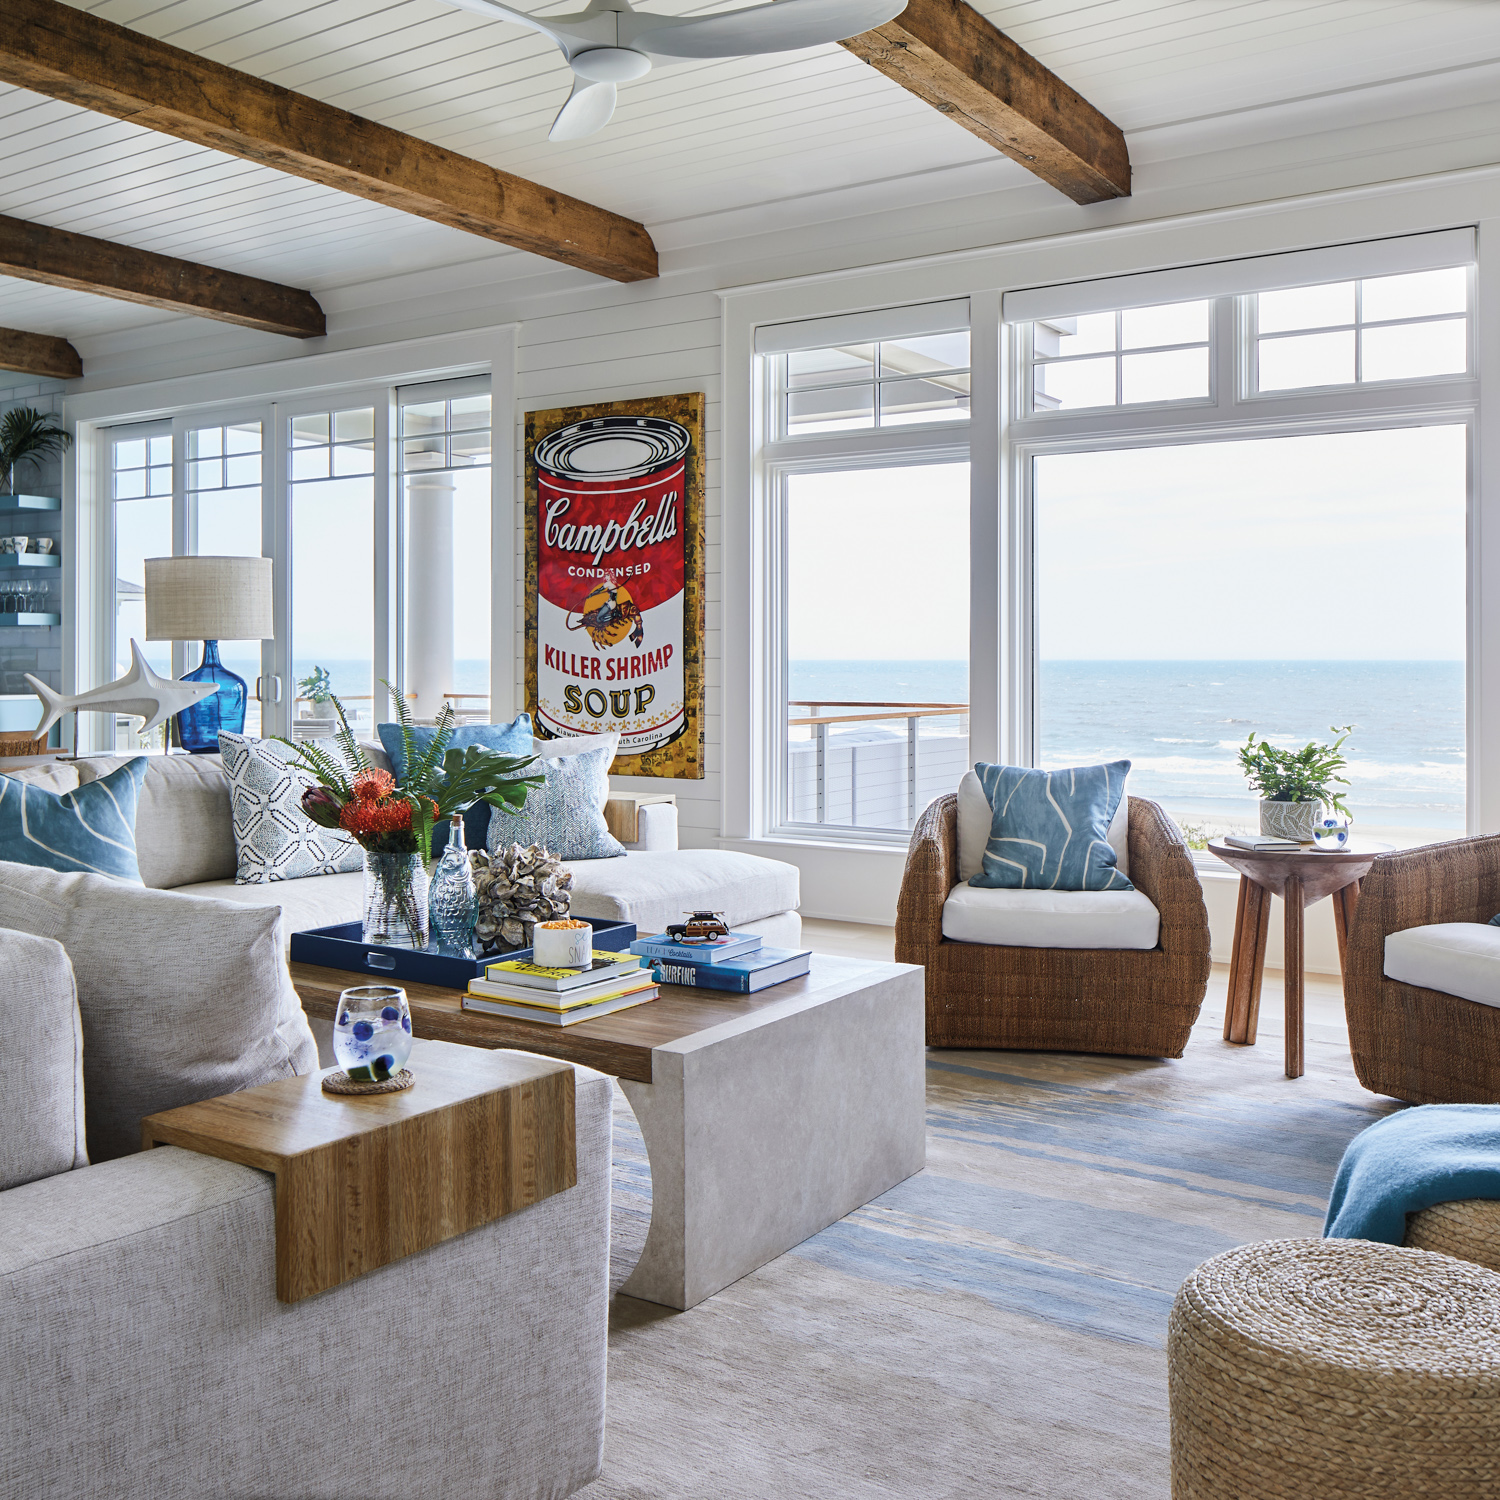 Living room with ocean views, neutral upholstery and brown wood ceiling beams